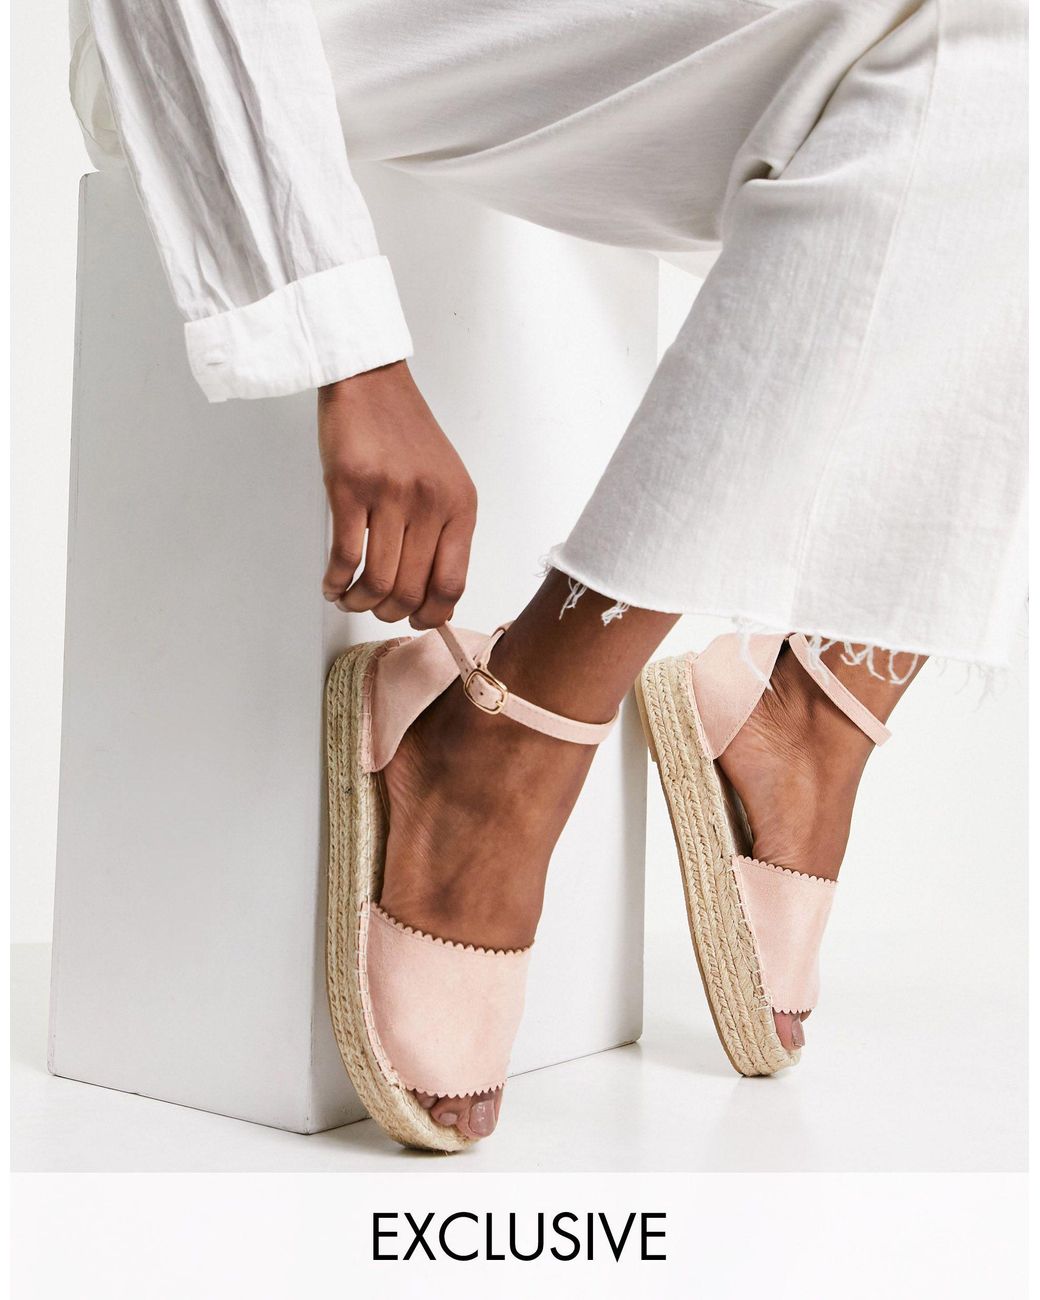 South Beach – exklusive espadrilles mit flacher plateausohle | Lyst AT